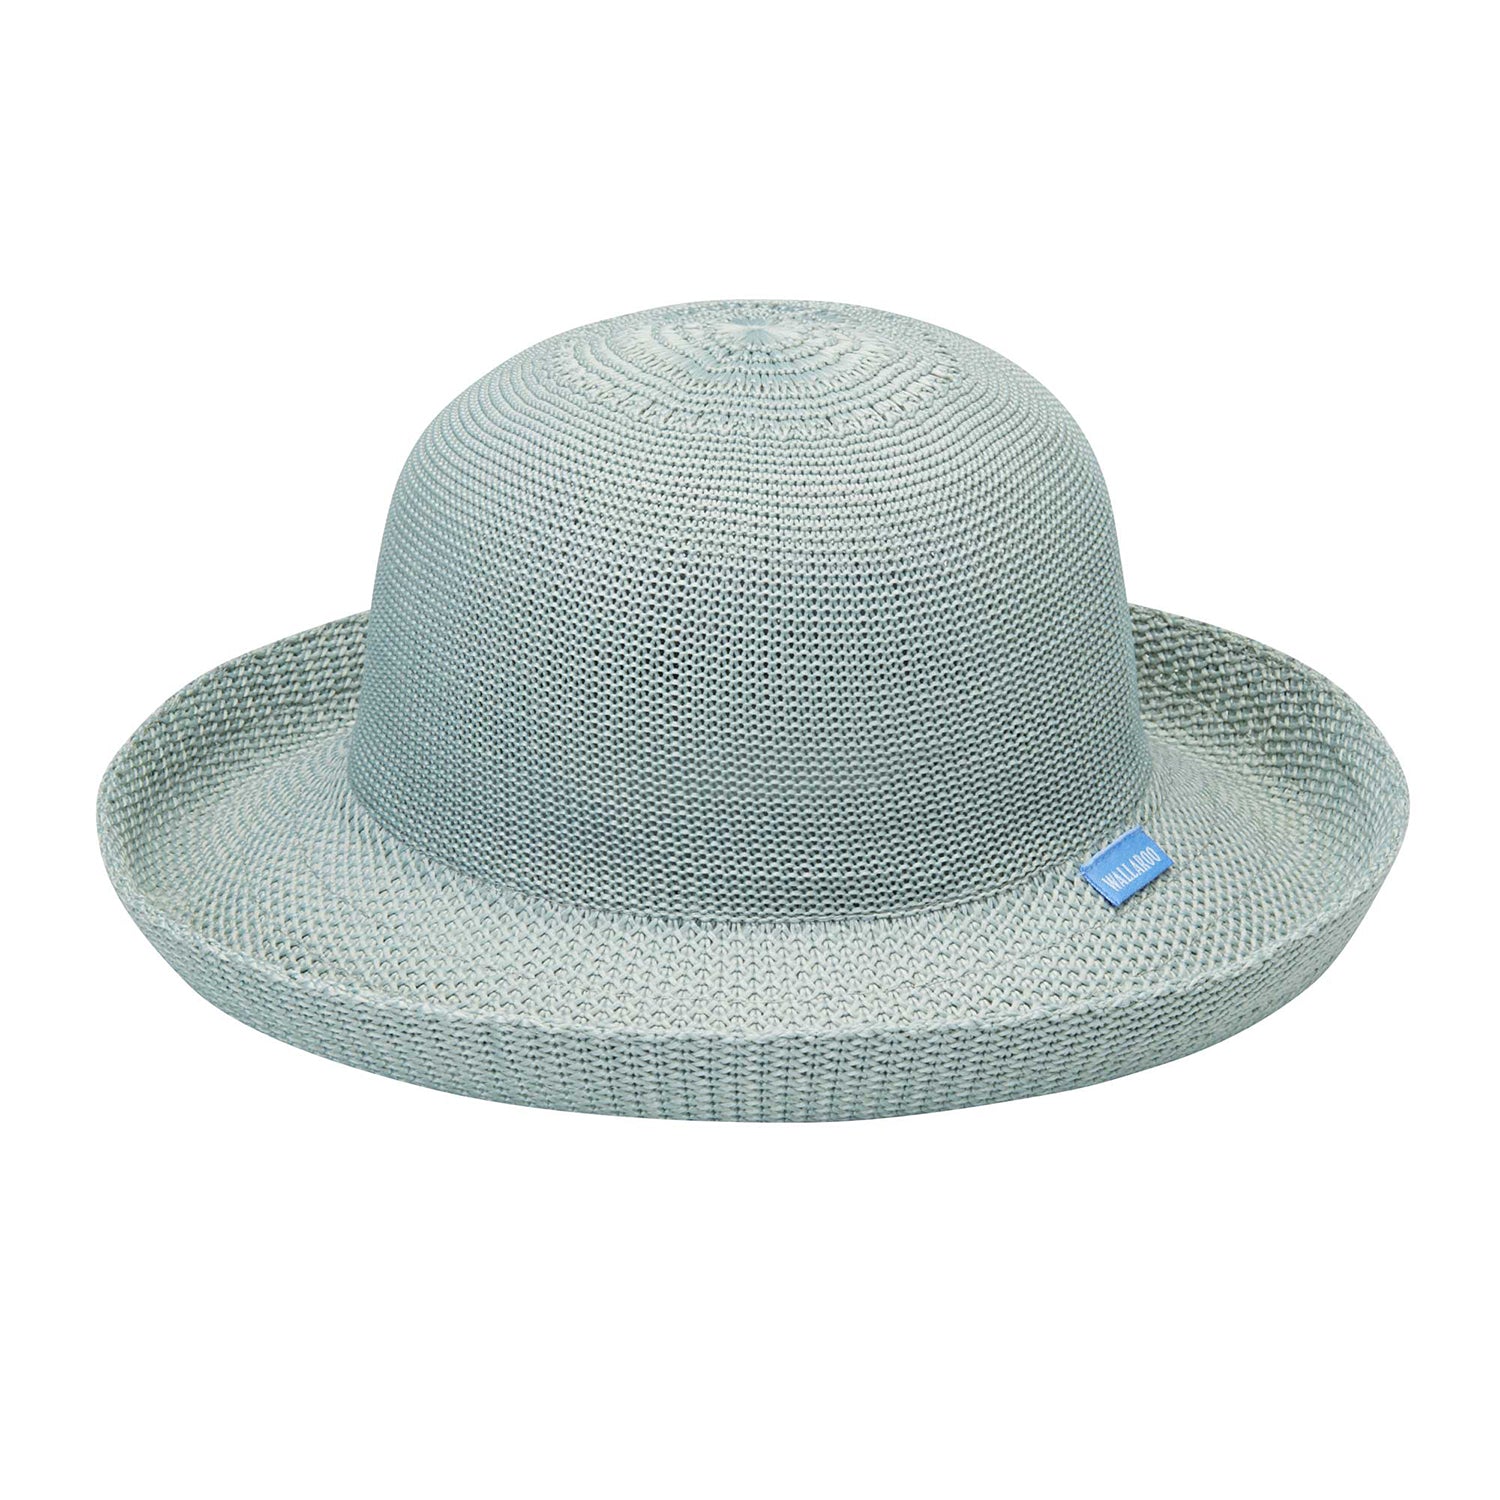 Featuring Petite Victoria straw hat for ladies with upturned brim by Wallaroo